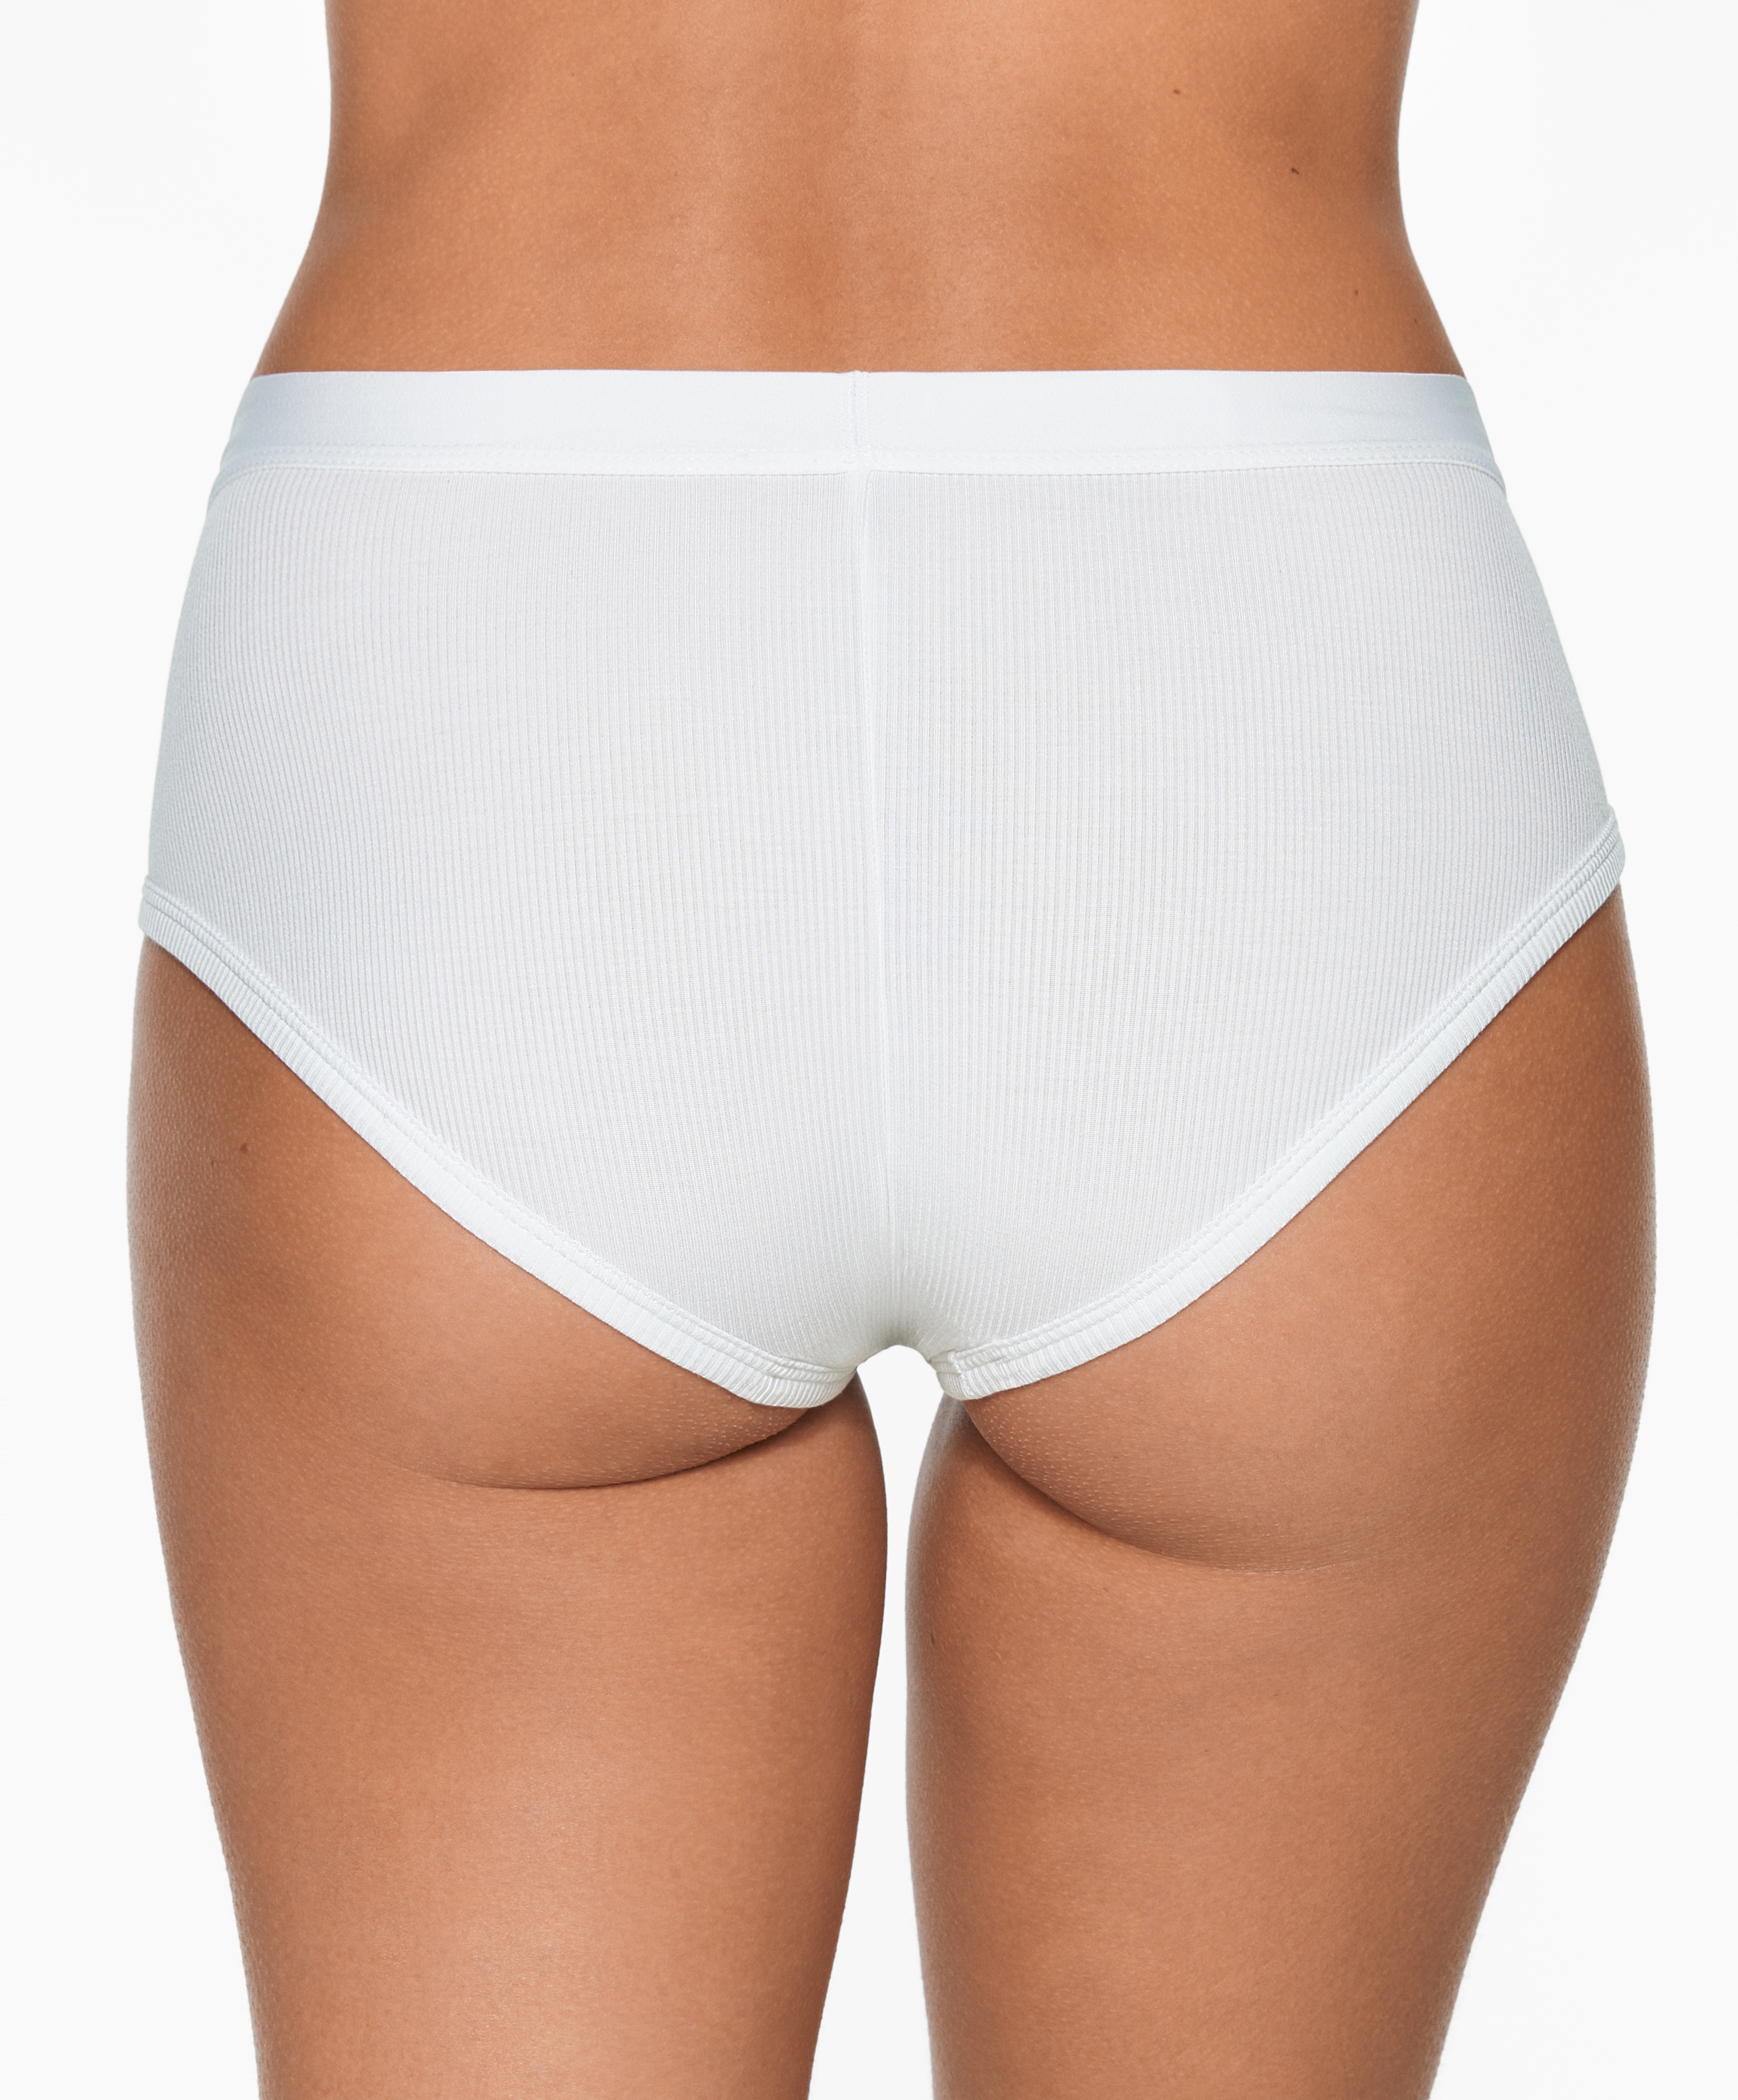 Culotte briefs in a modal blend fabric with rib texture. Elastic waistband with logo detail.